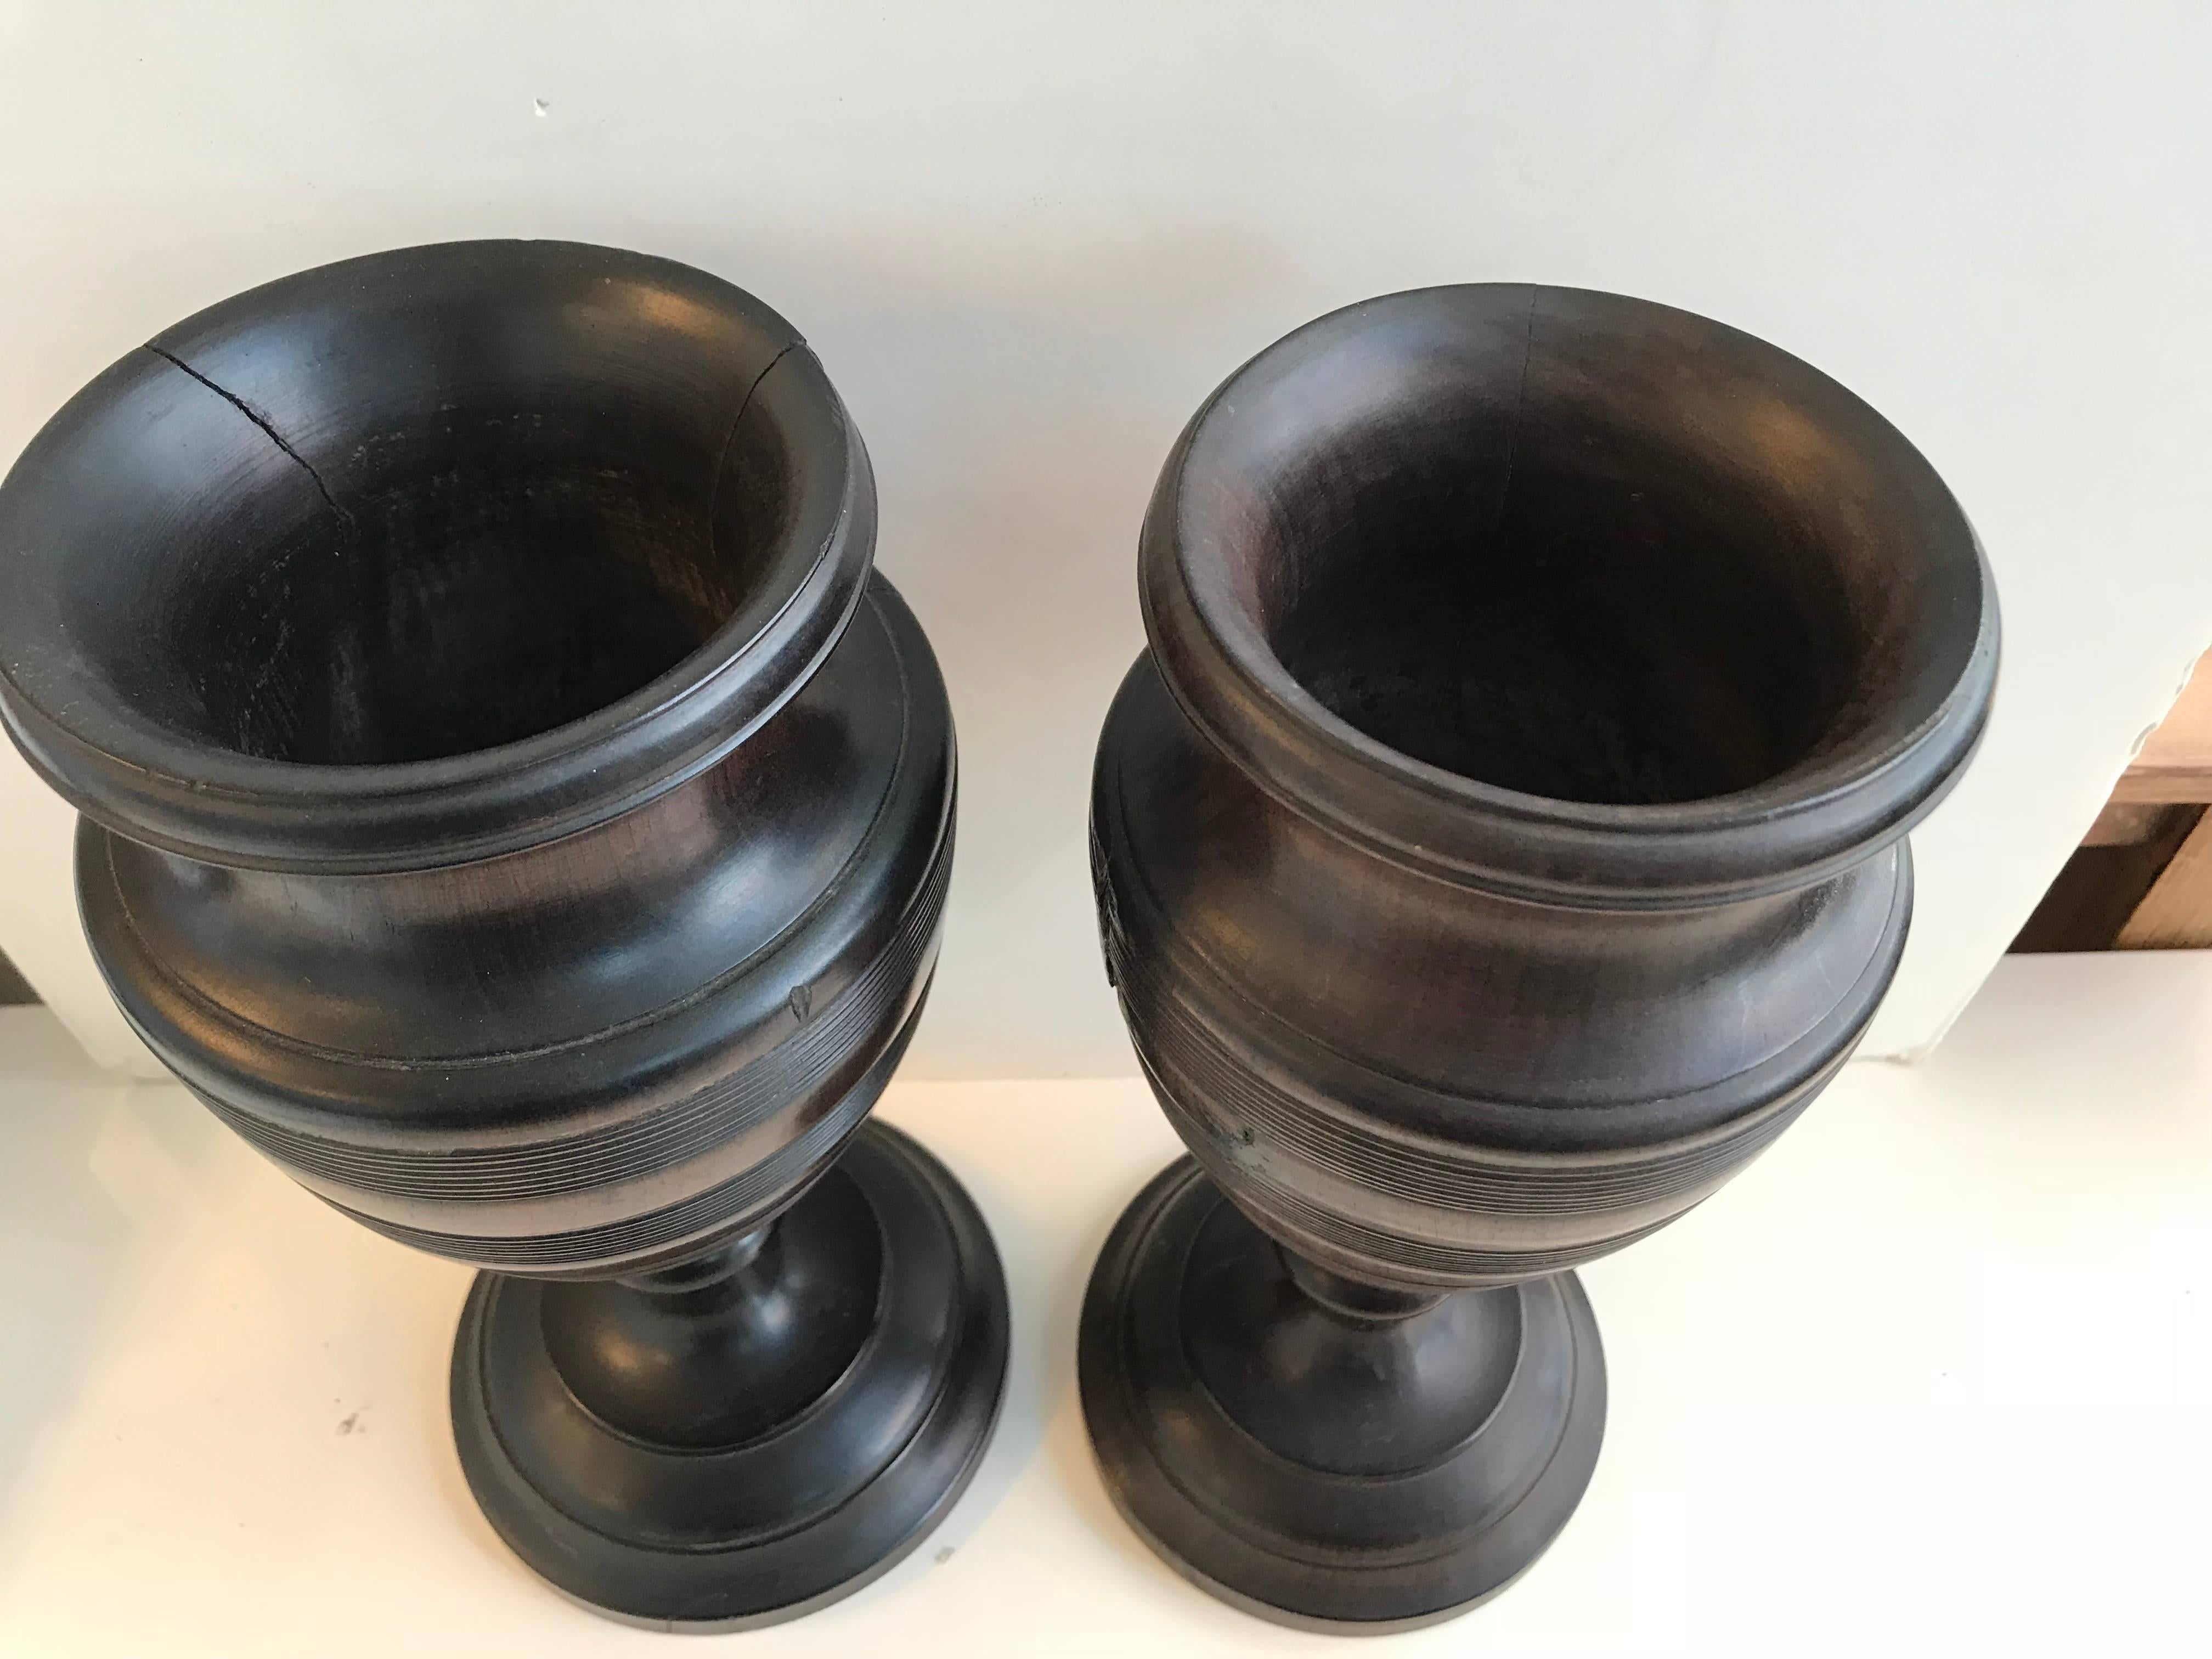 19th century pair of turned walnut vases. Dark color and substantially weighted.

